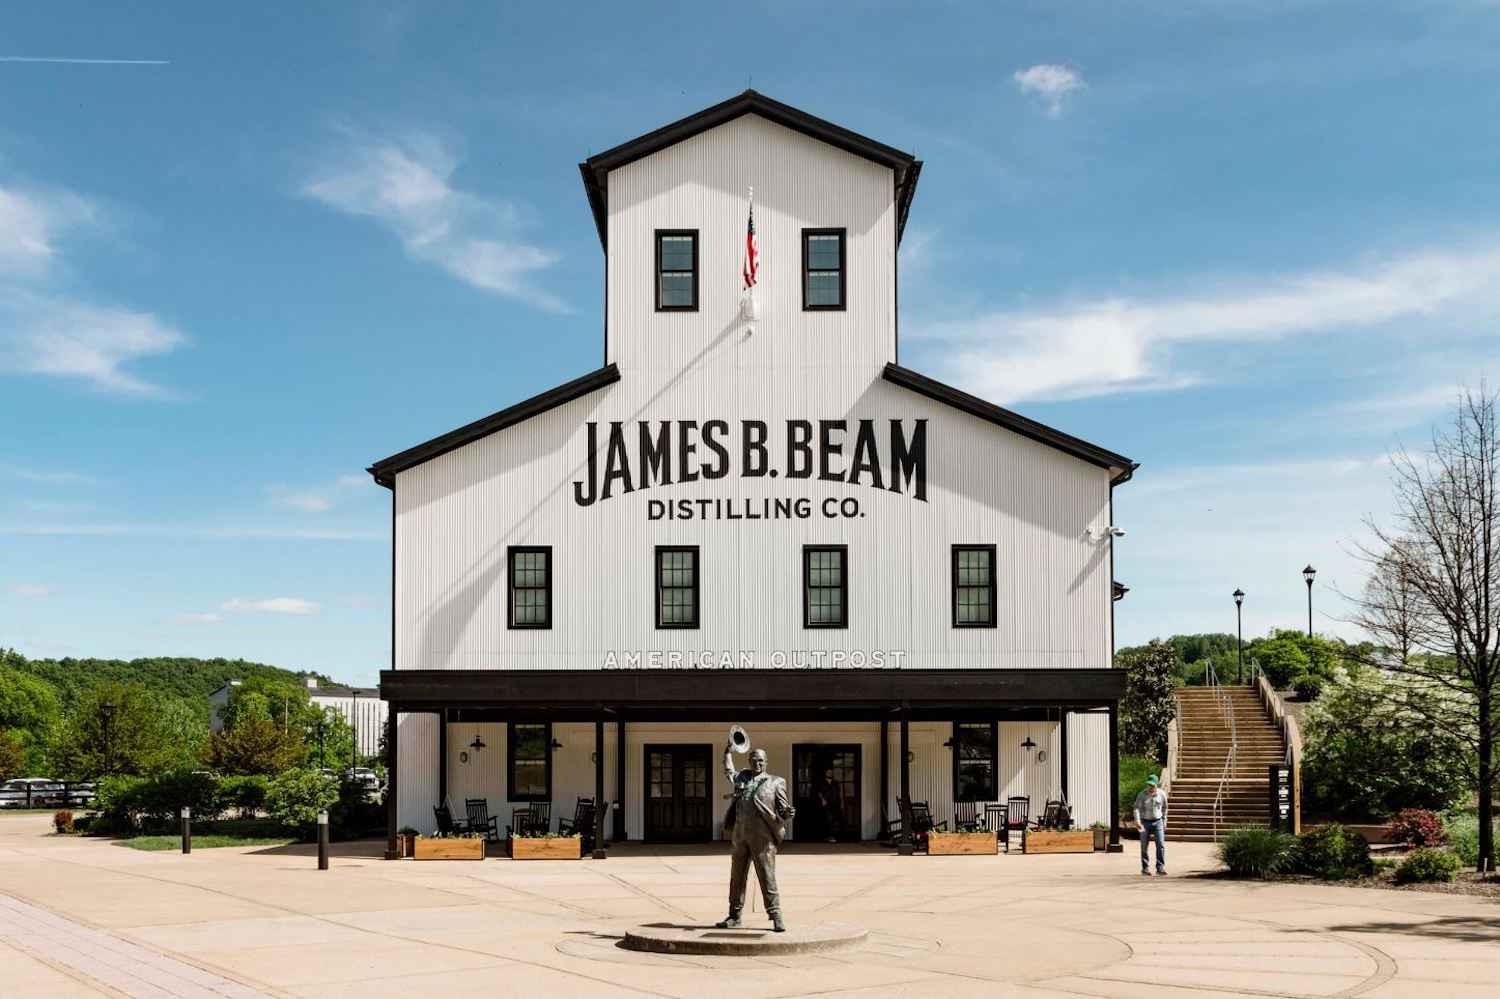 James Beam Distilling Co. American Outpost in Kentucky.